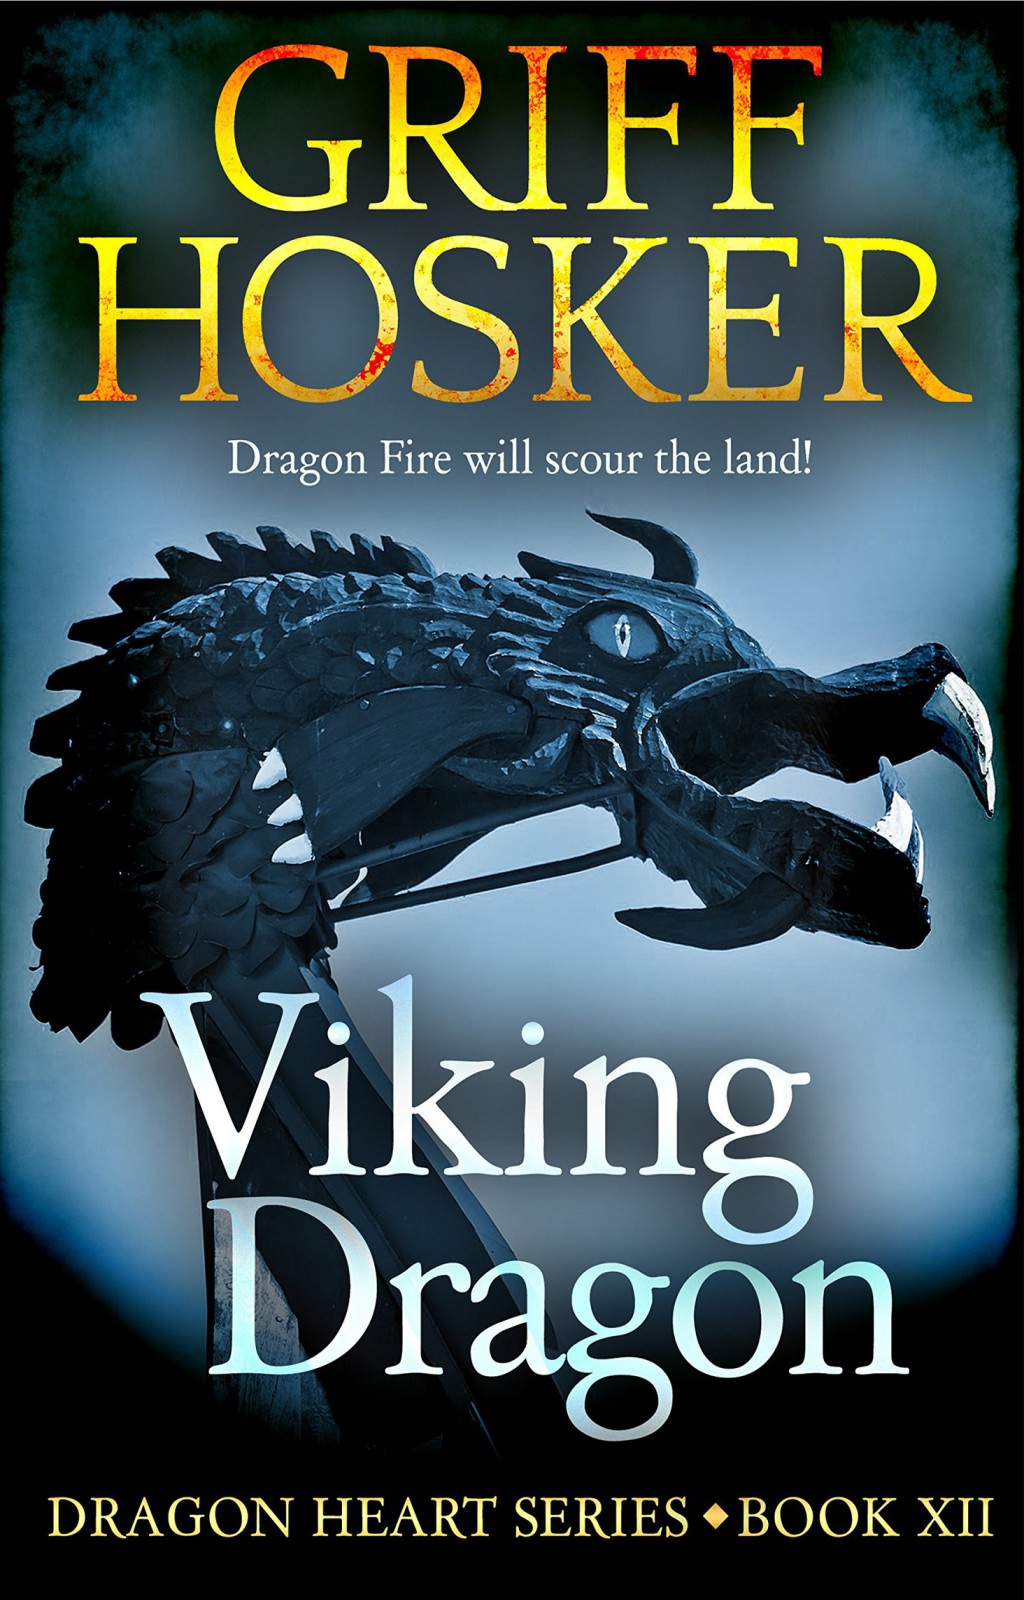 Viking Dragon by Griff Hosker